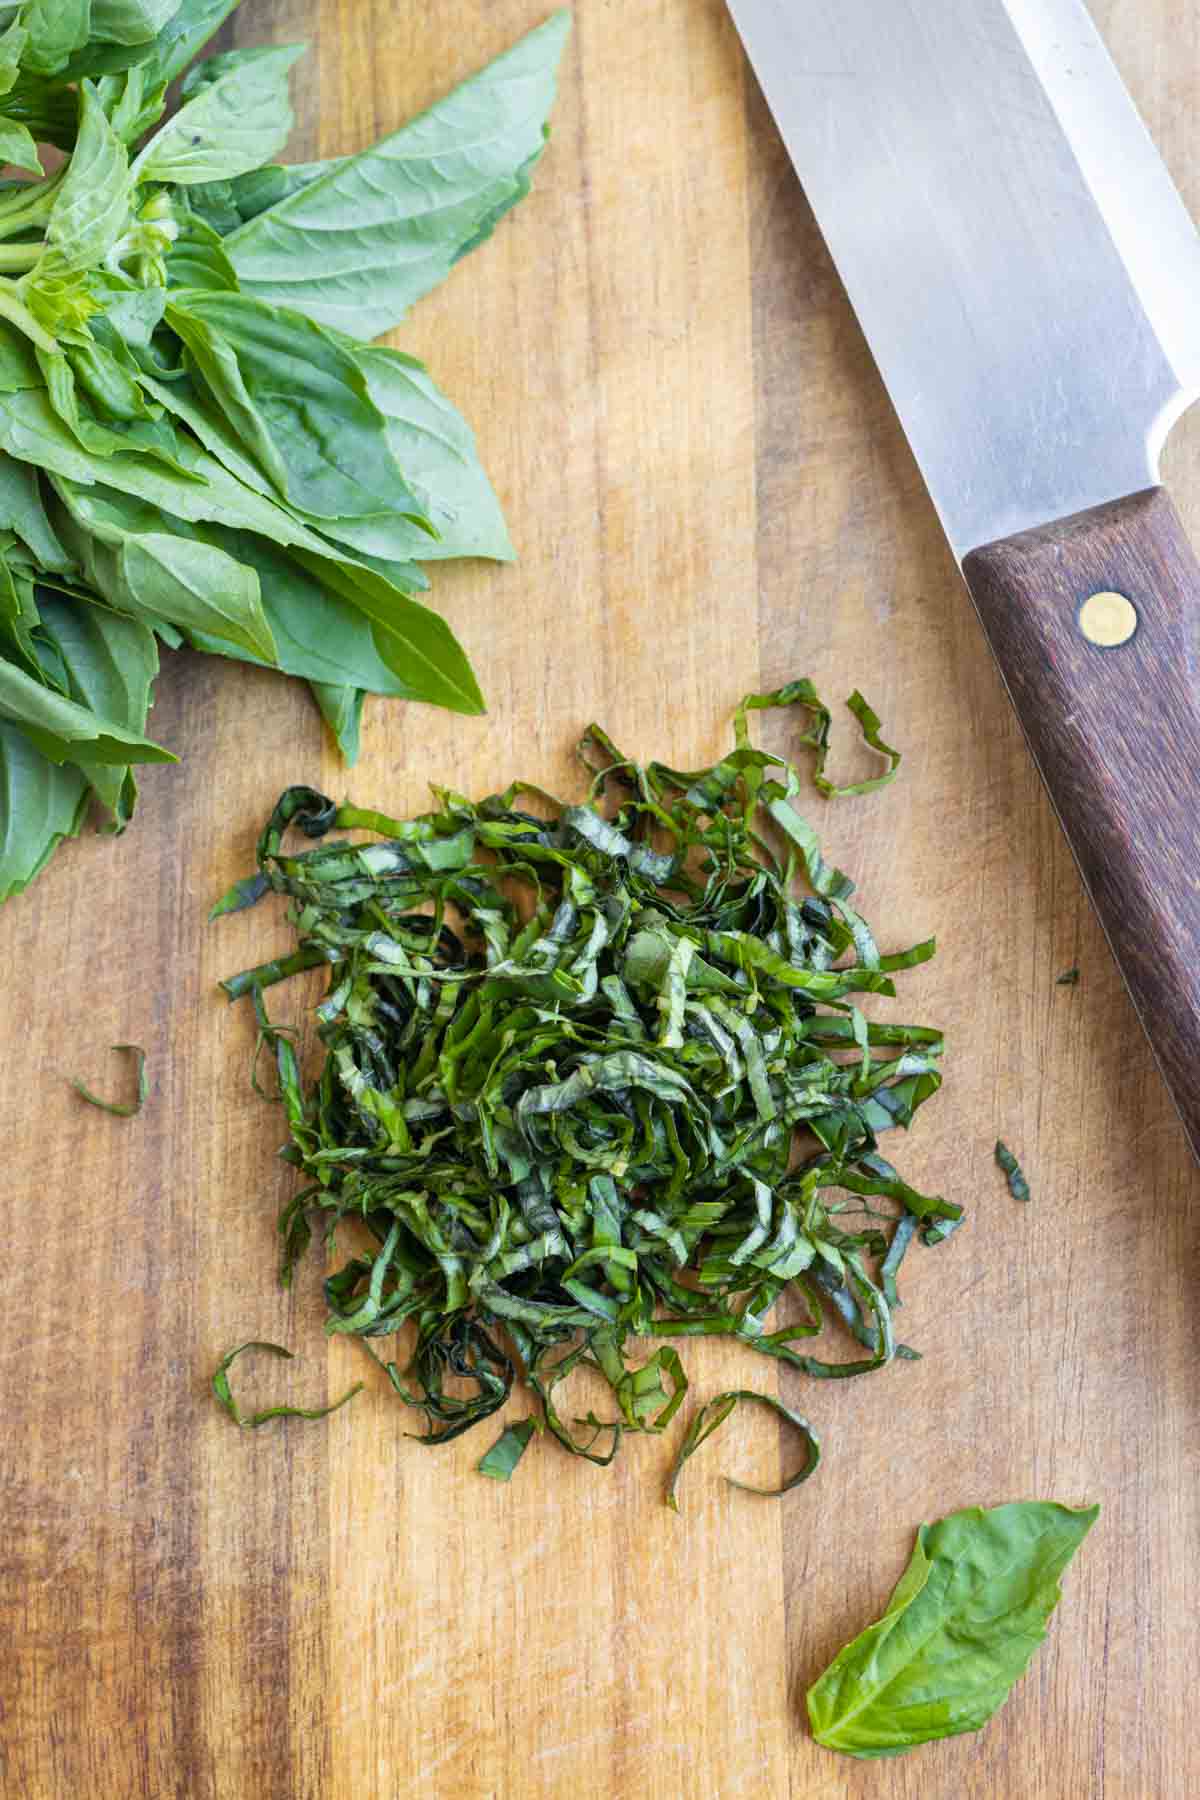 Chiffonade is simple to cut and adds a pop of color to dishes.